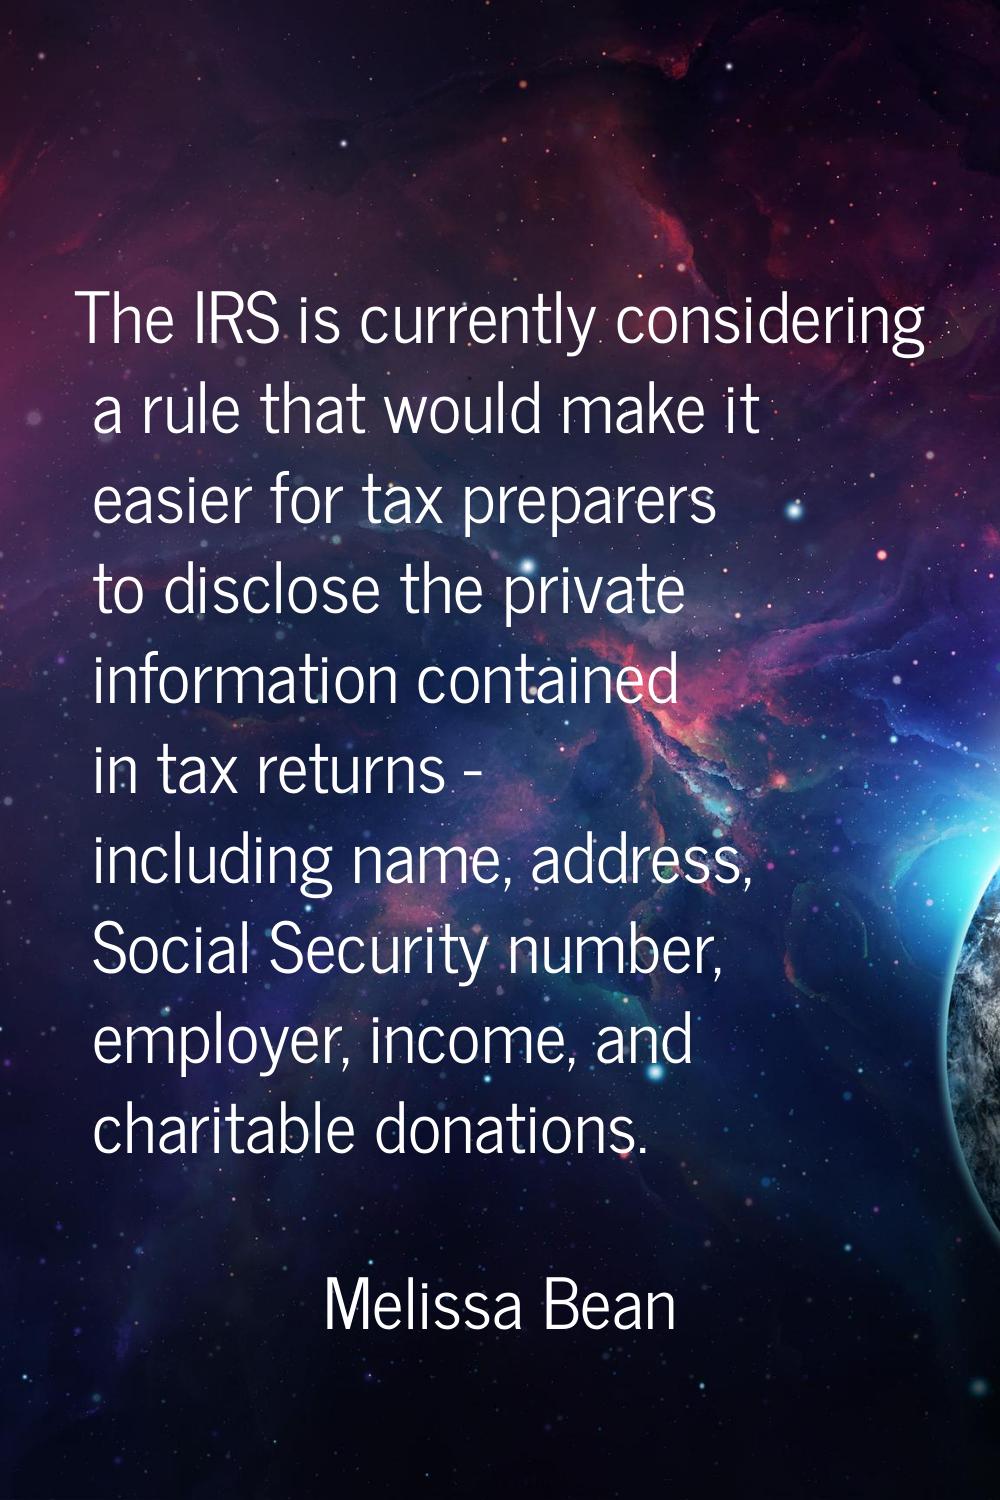 The IRS is currently considering a rule that would make it easier for tax preparers to disclose the